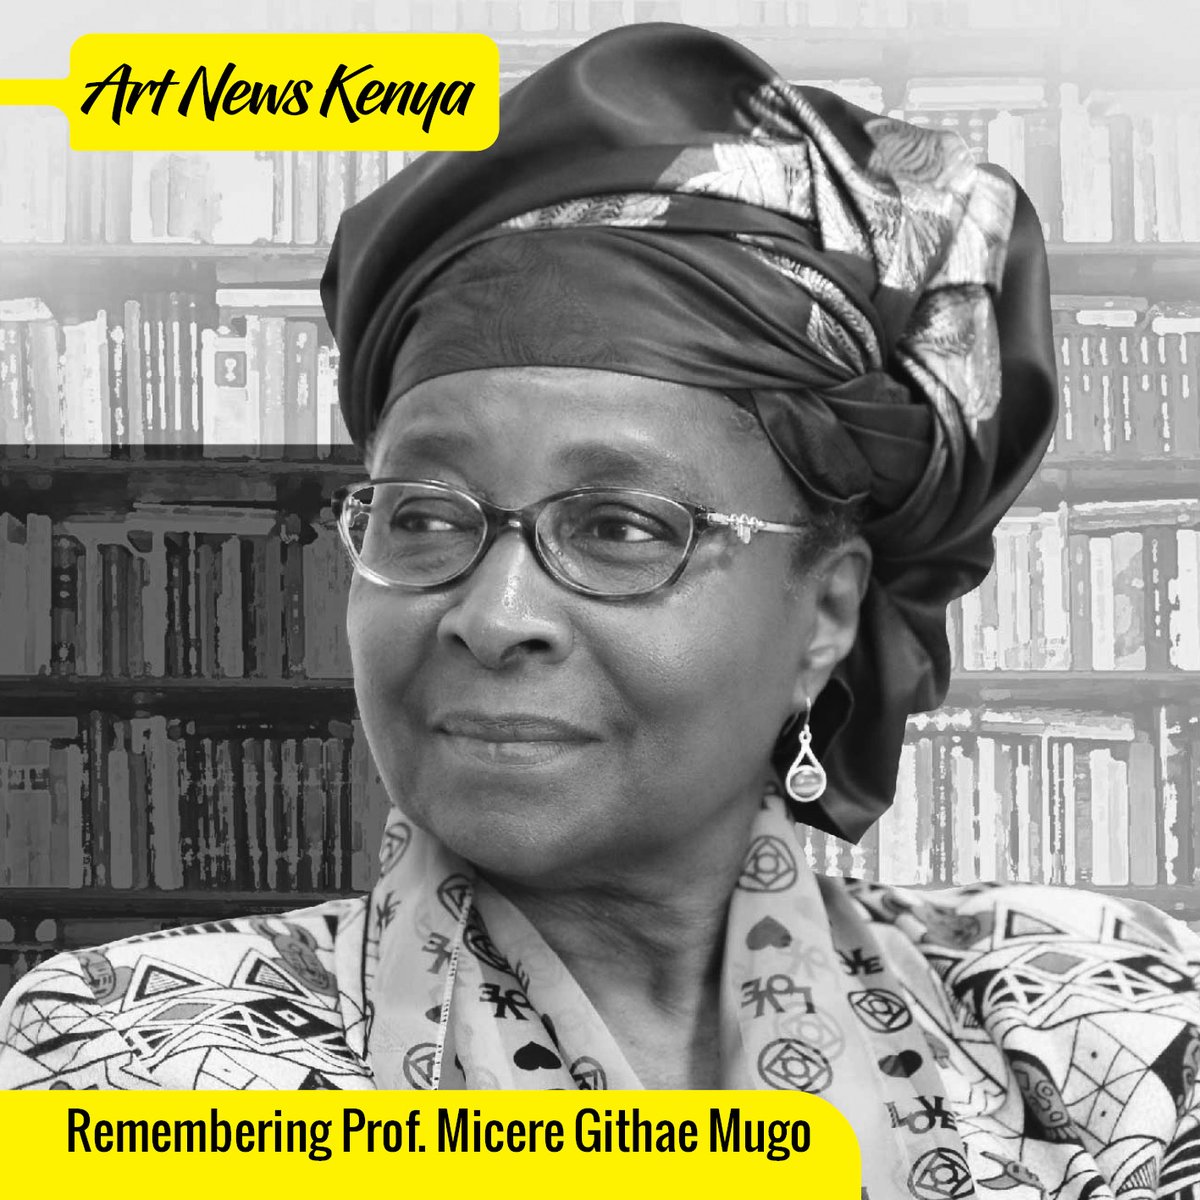 Remembering Prof Micere Githae Mugo:

There are two planned events on 8th and 9th August to remember and honour the playwright, artist, author, activist, professor of Orature and an advocate for 'UTU'- the ideology of Humanity.  'I am because we are.'

(1) Tuesday 8th August:…